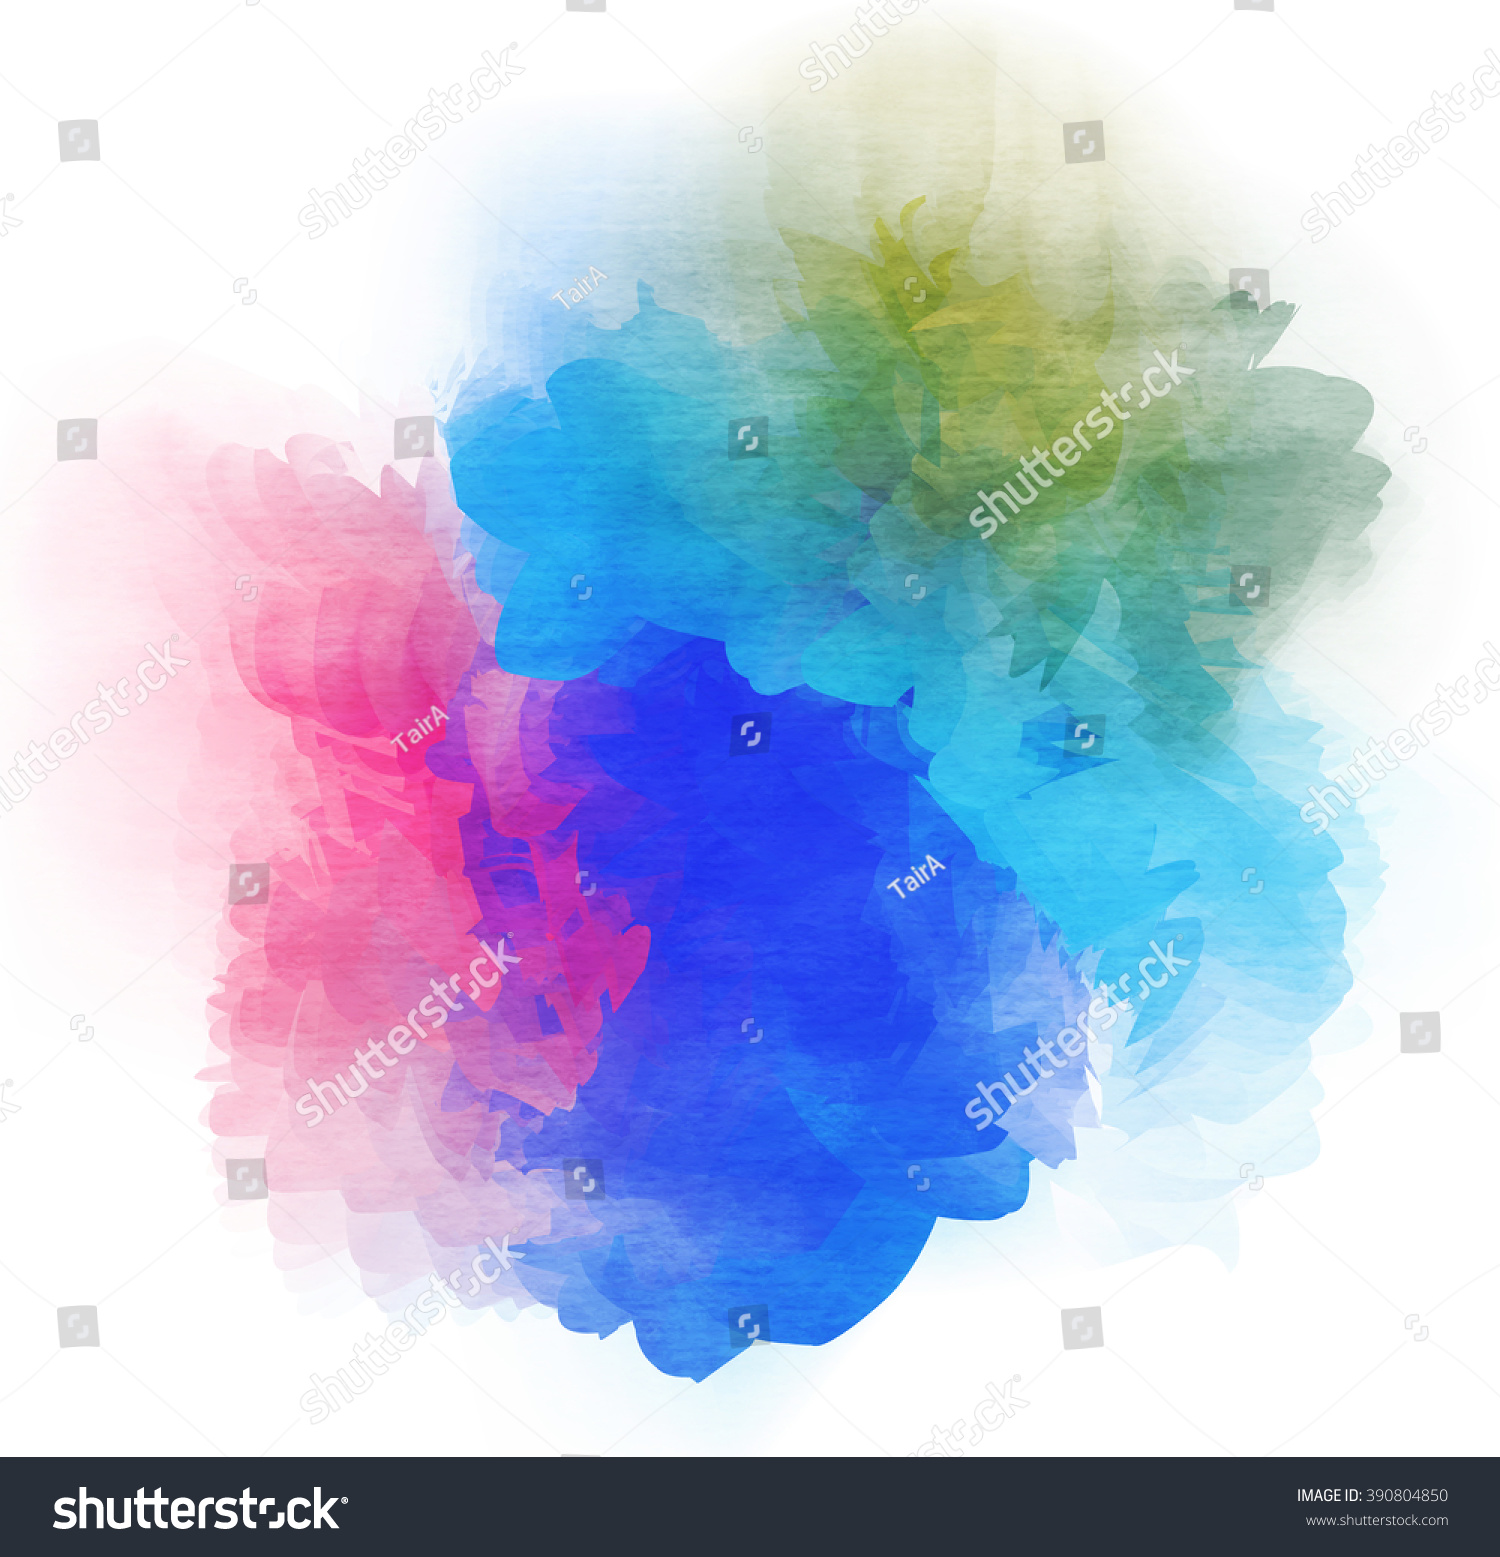 Abstract Colorful Watercolor Background Digital Art Stock ...